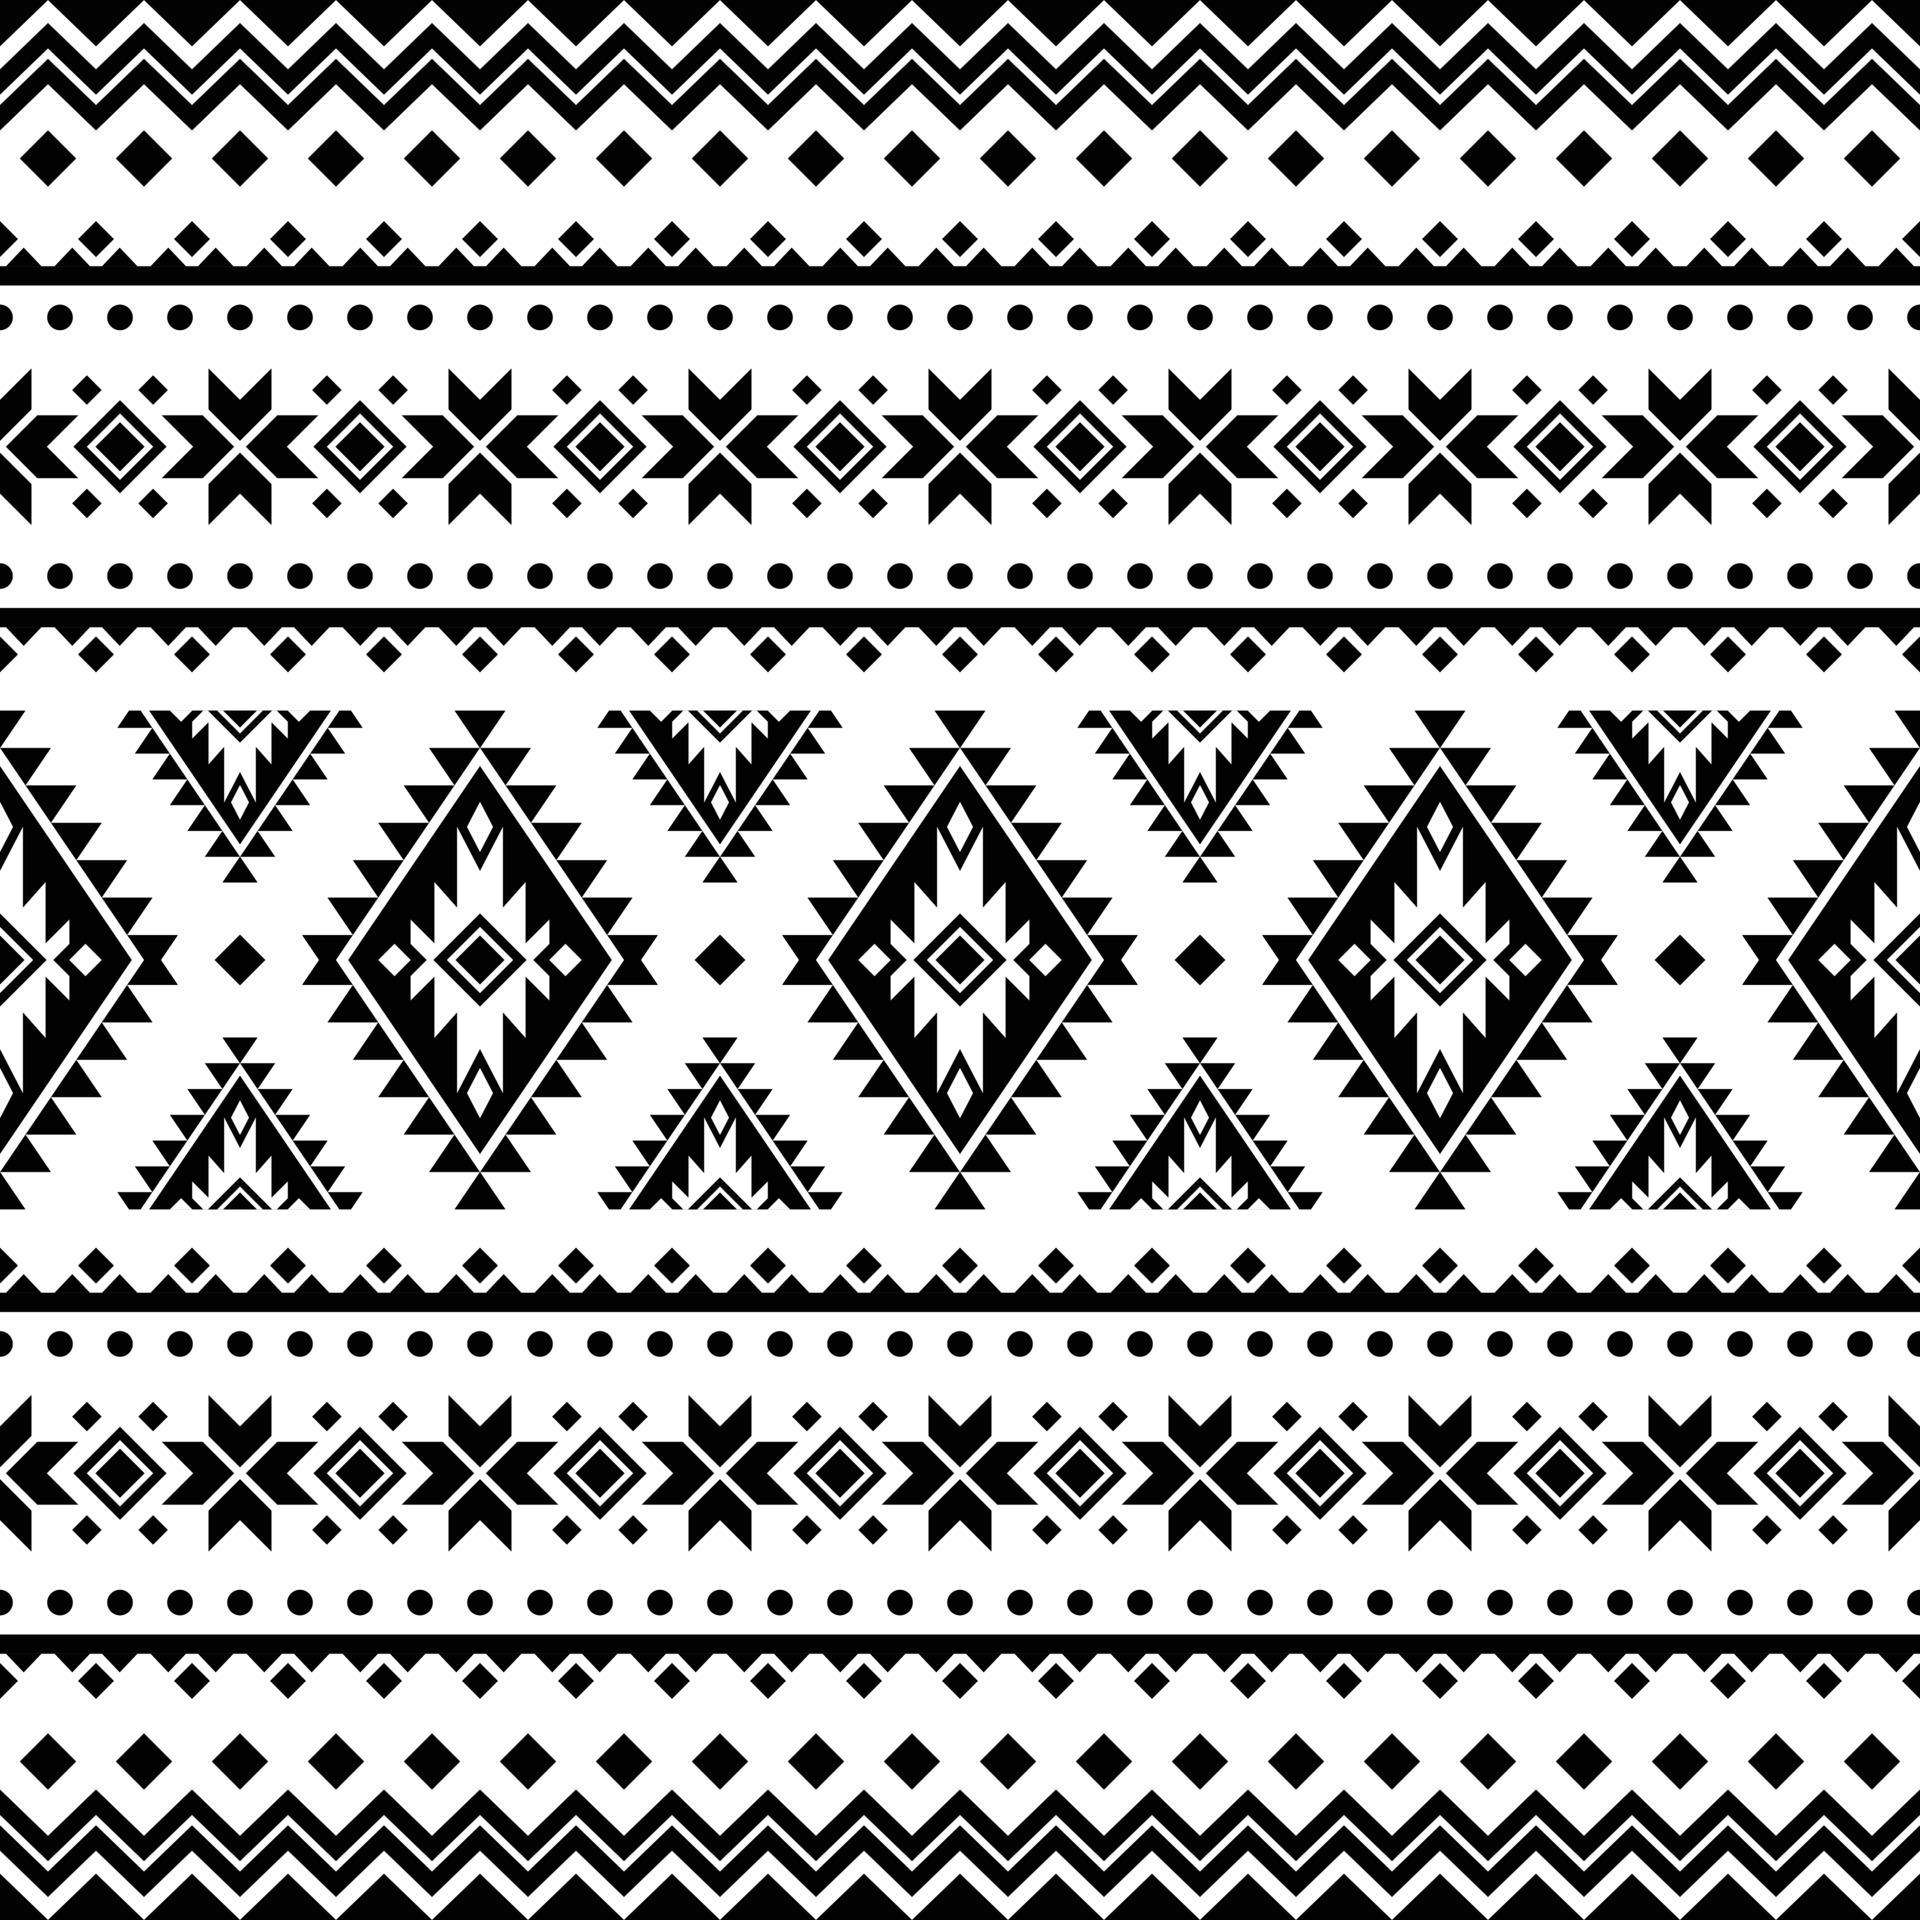 Ethnic geometric print pattern design Aztec repeating background texture in black  and white. Fabric, cloth design, wallpaper, wrapping, Stock vector